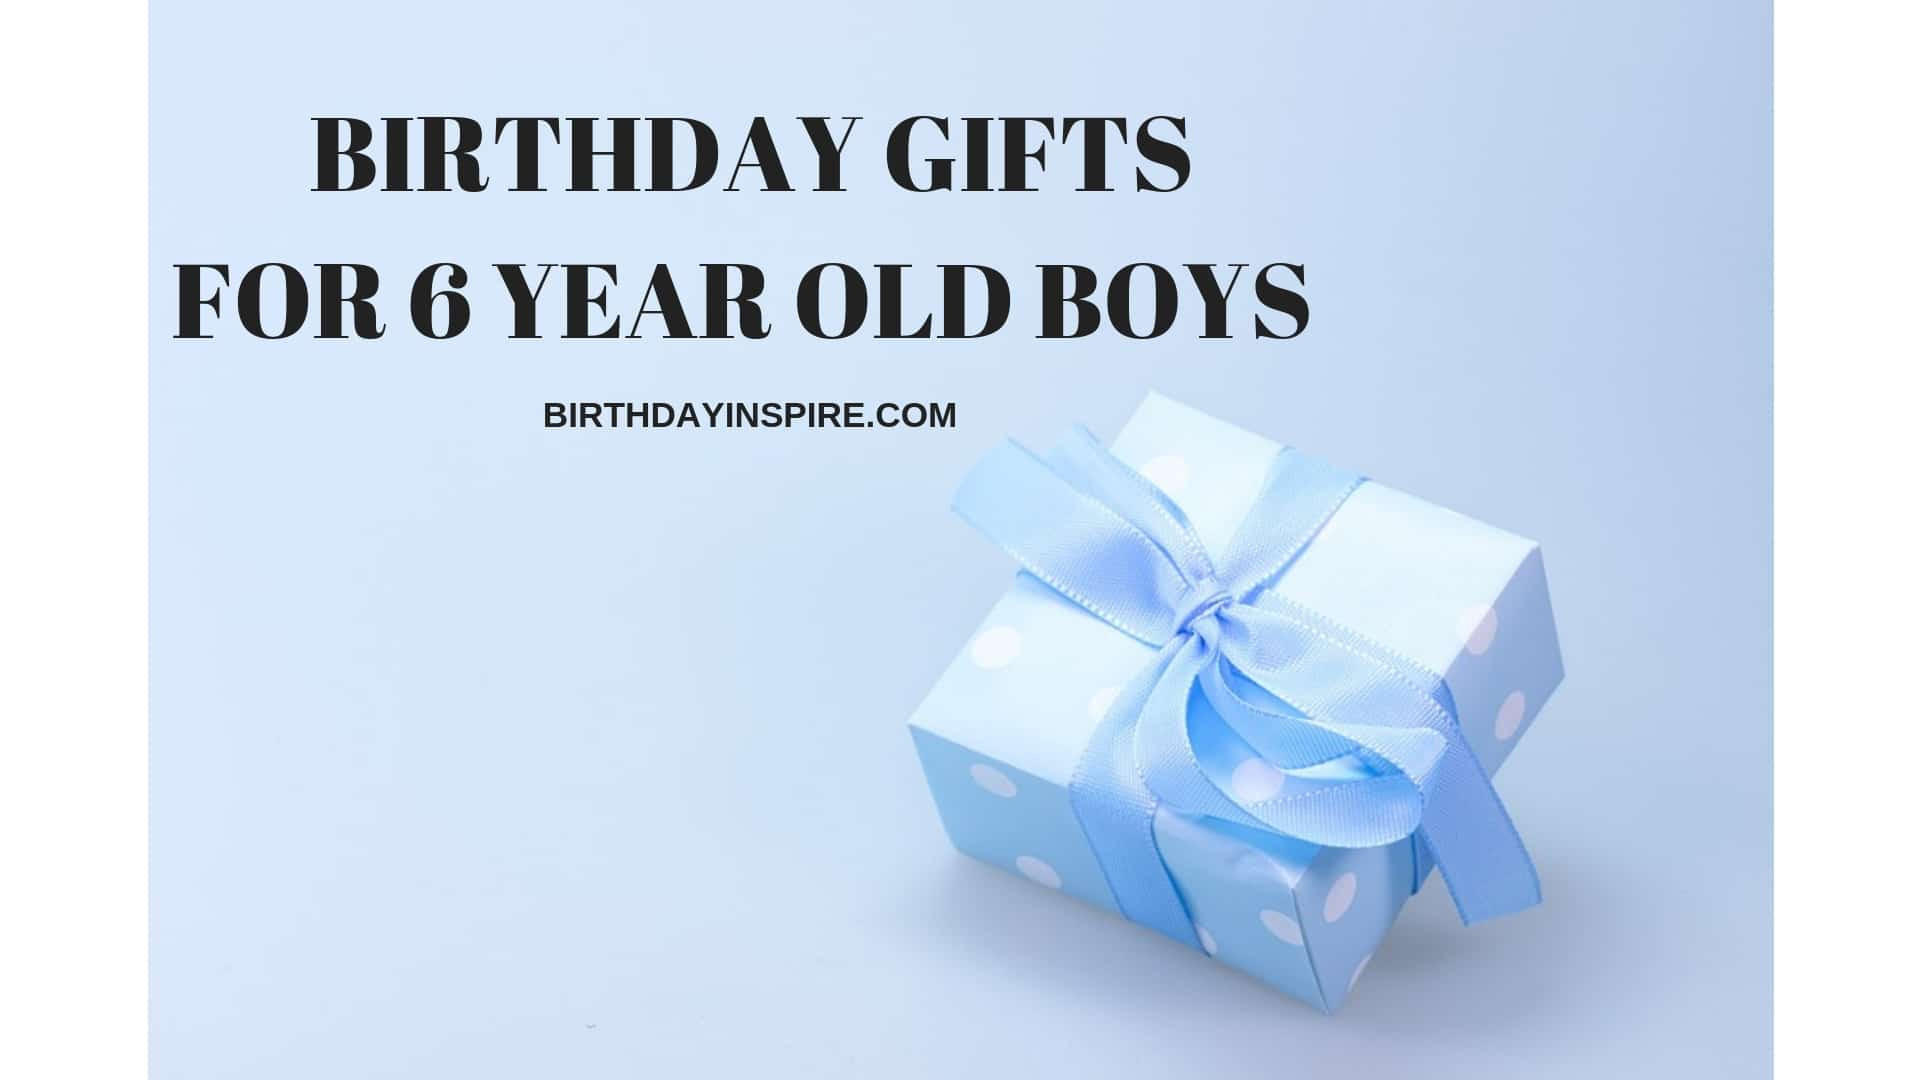 6 Year Old Birthday Gift
 33 Outstanding Birthday Gifts For 6 Year Old Boys